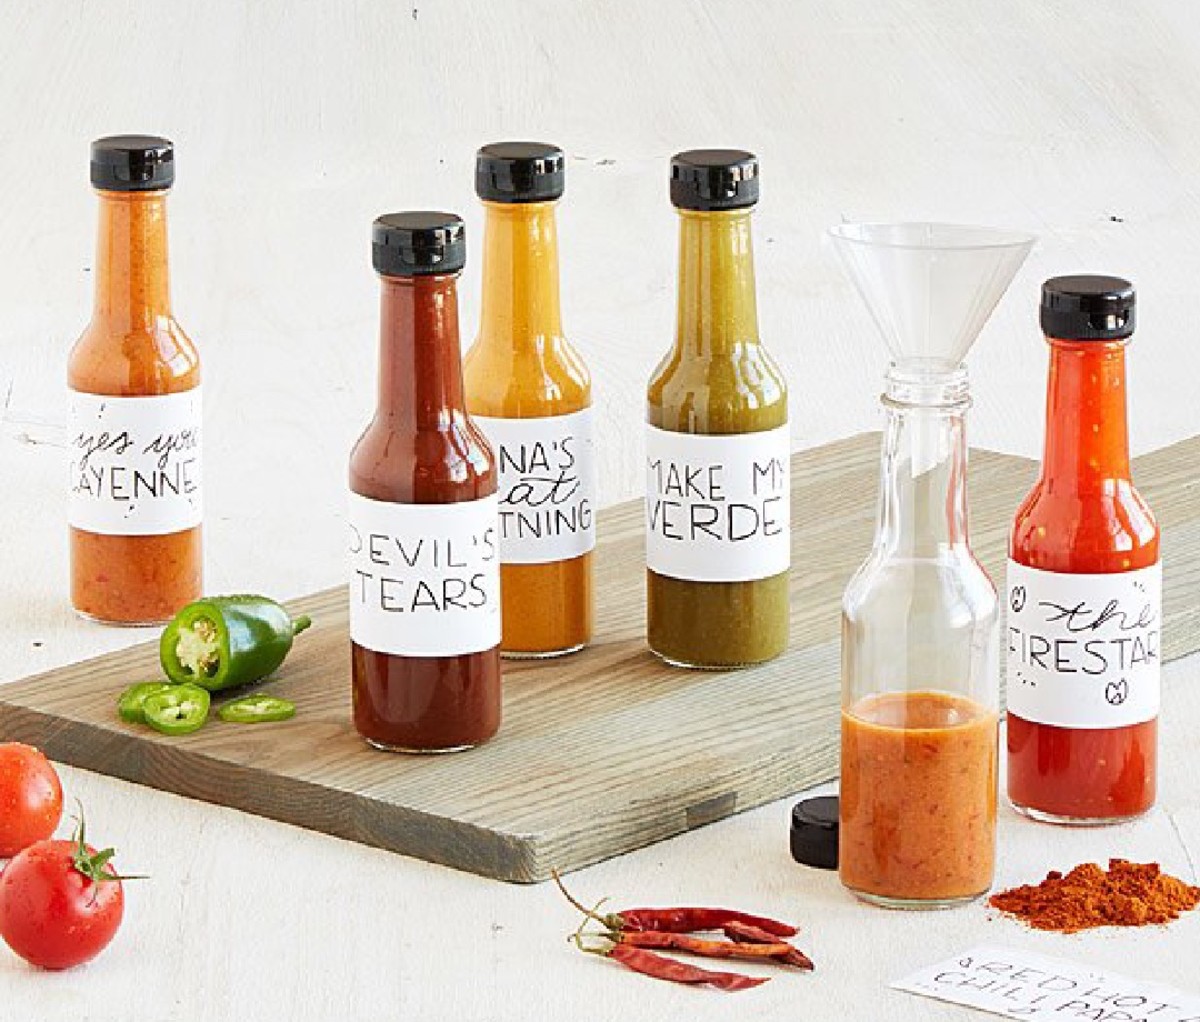 Uncommon Goods Make Your Own Hot Sauce Kit